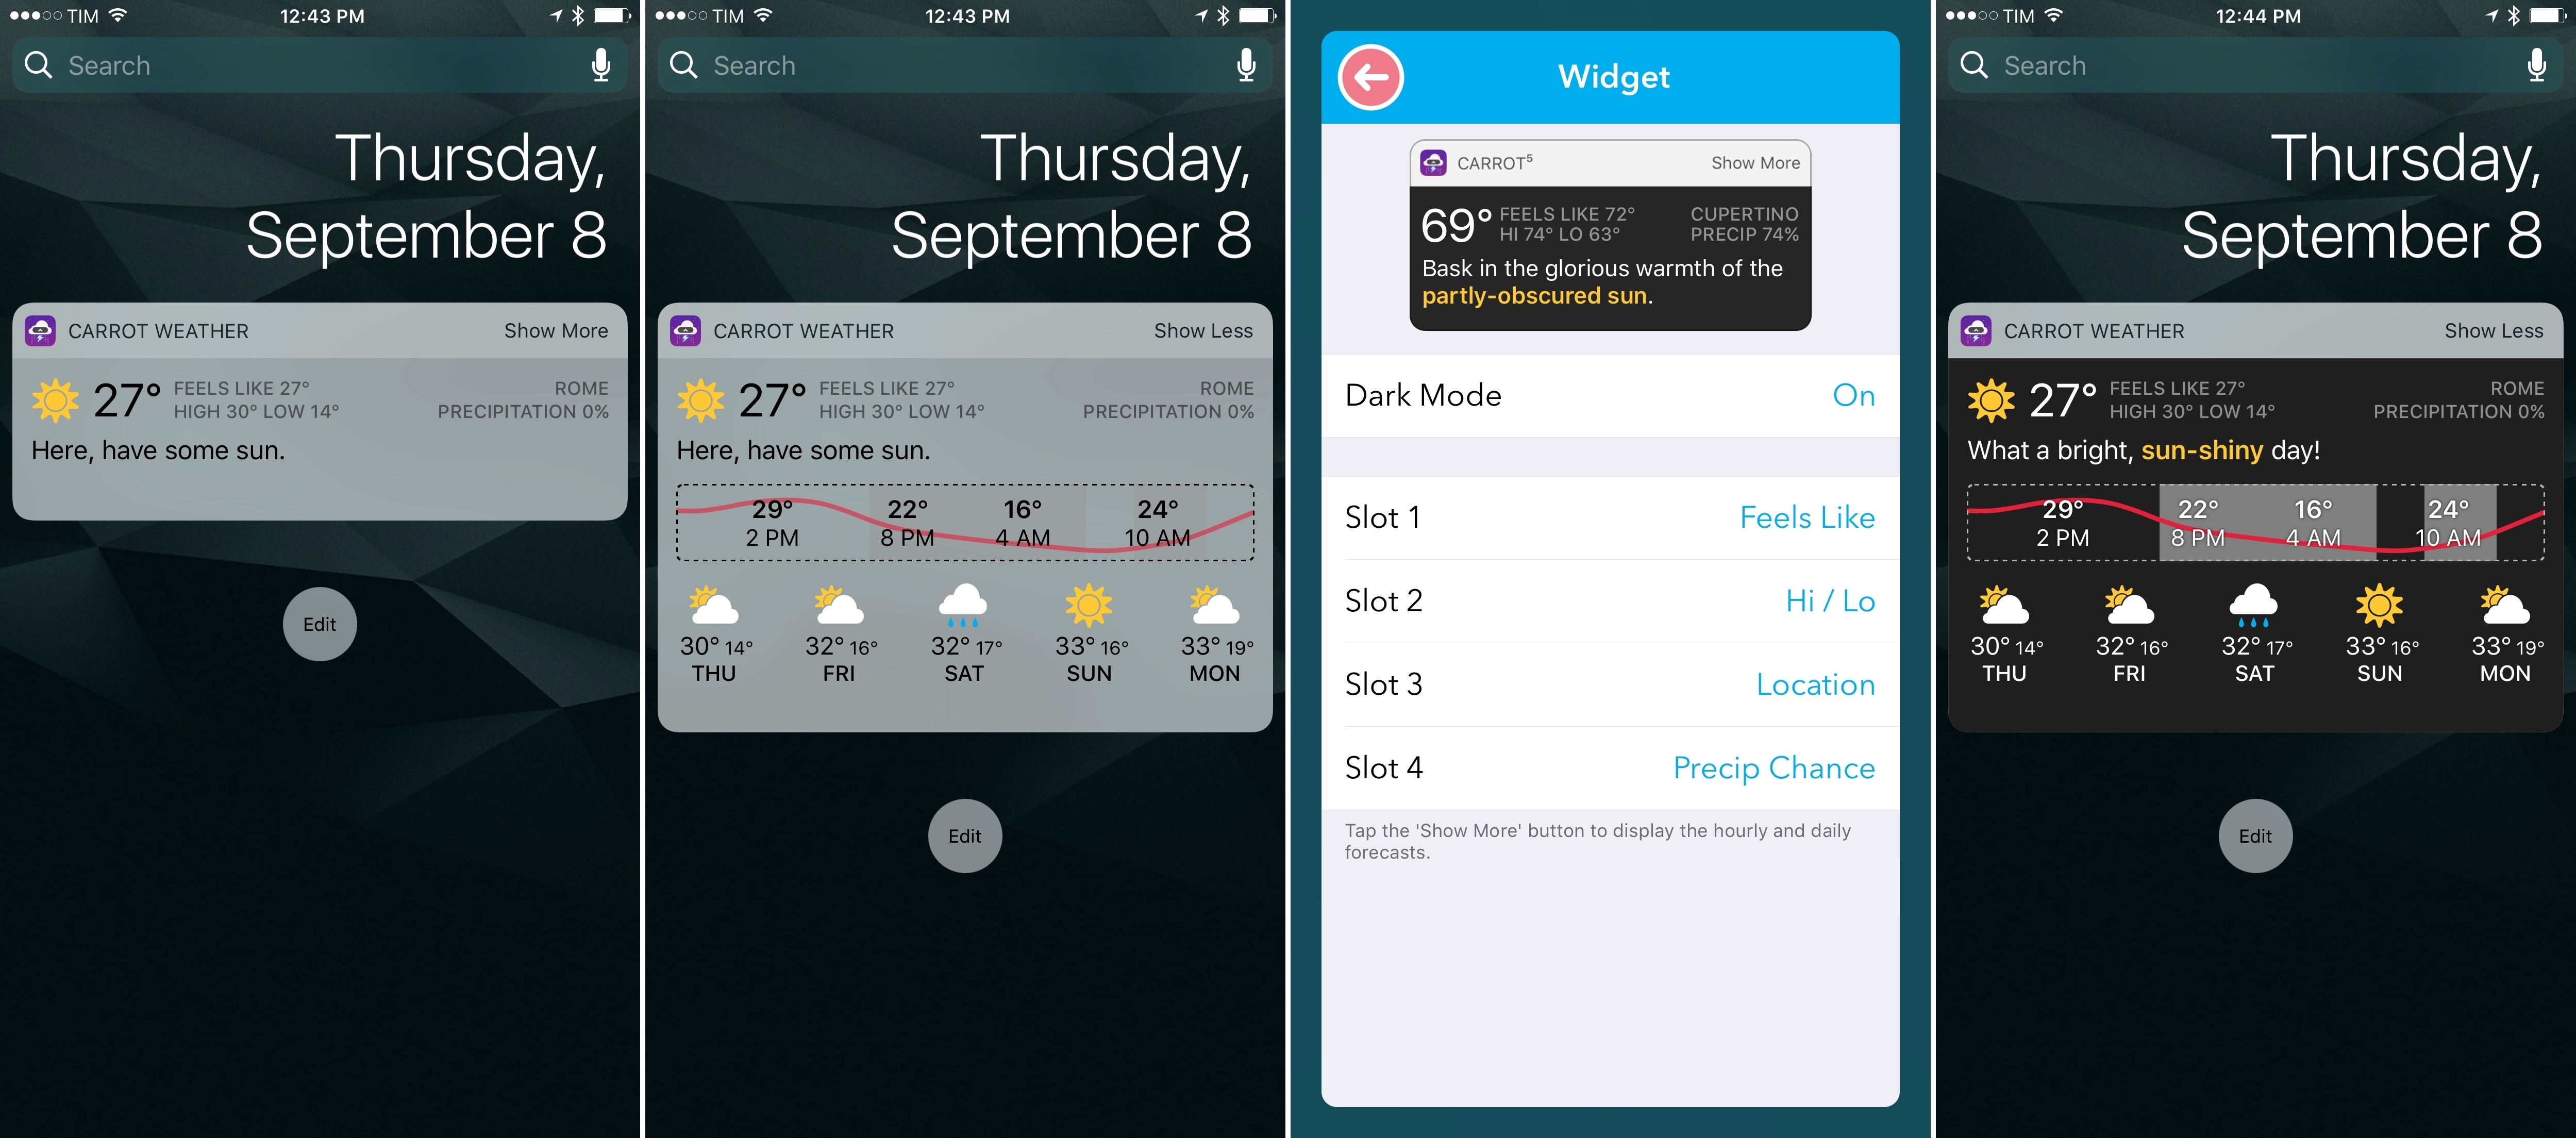 CARROT's widget can be customized with two styles.